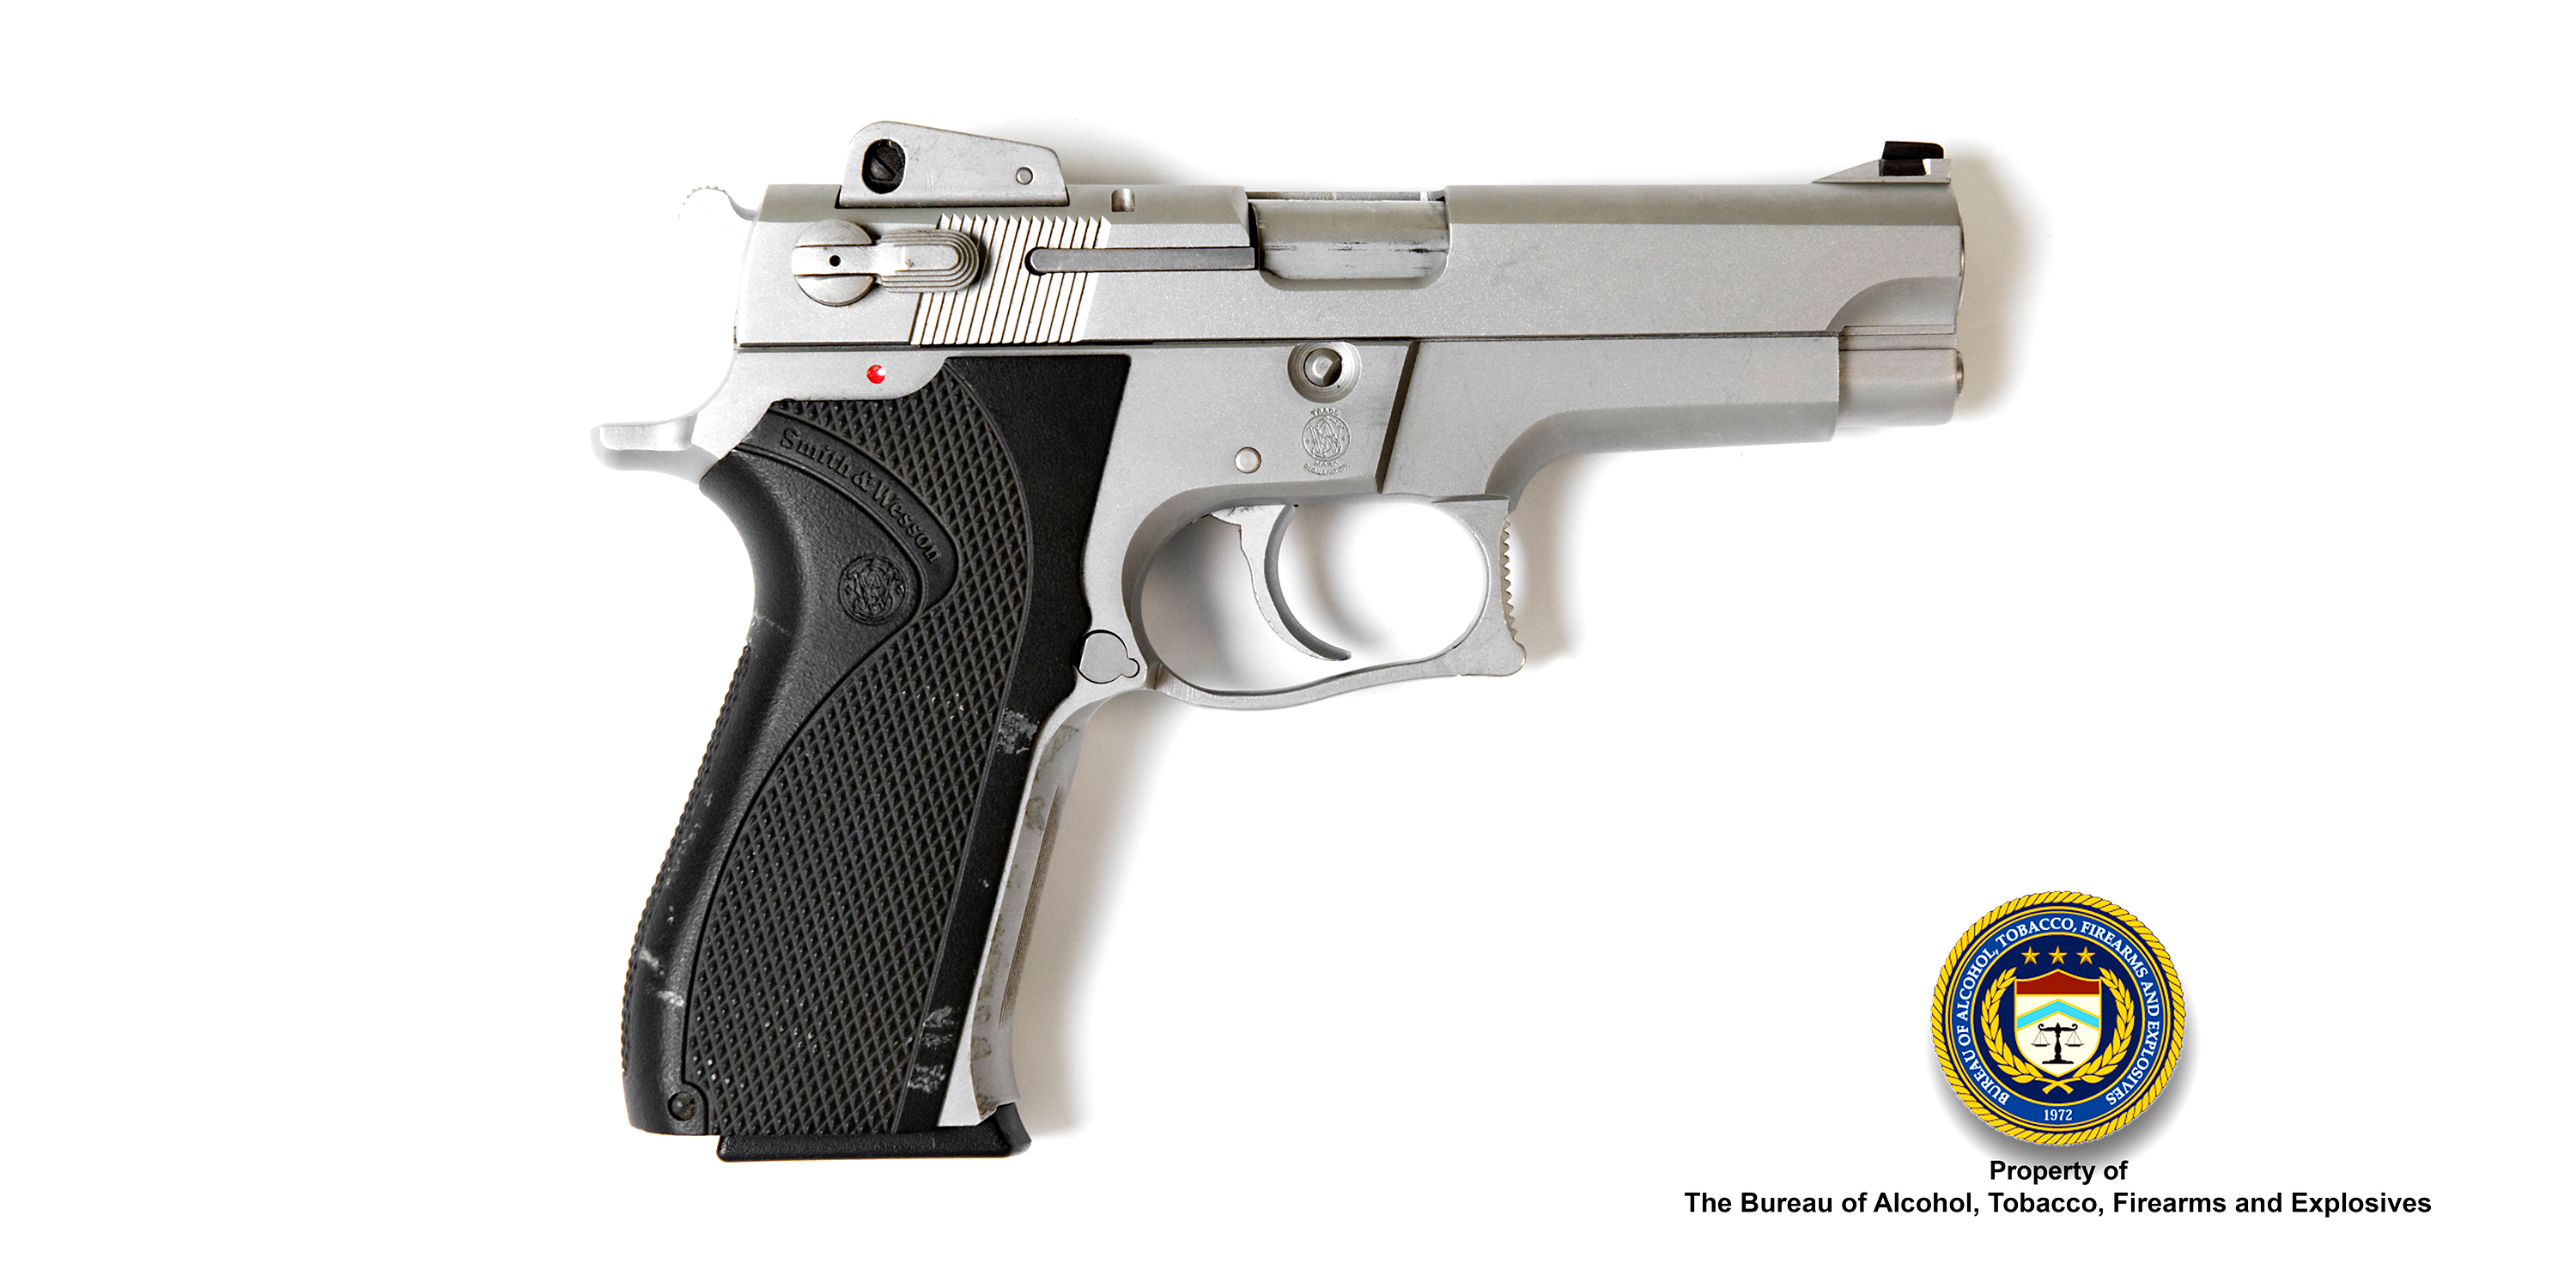 Images of Smith & Wesson Pistol | 3000x1500